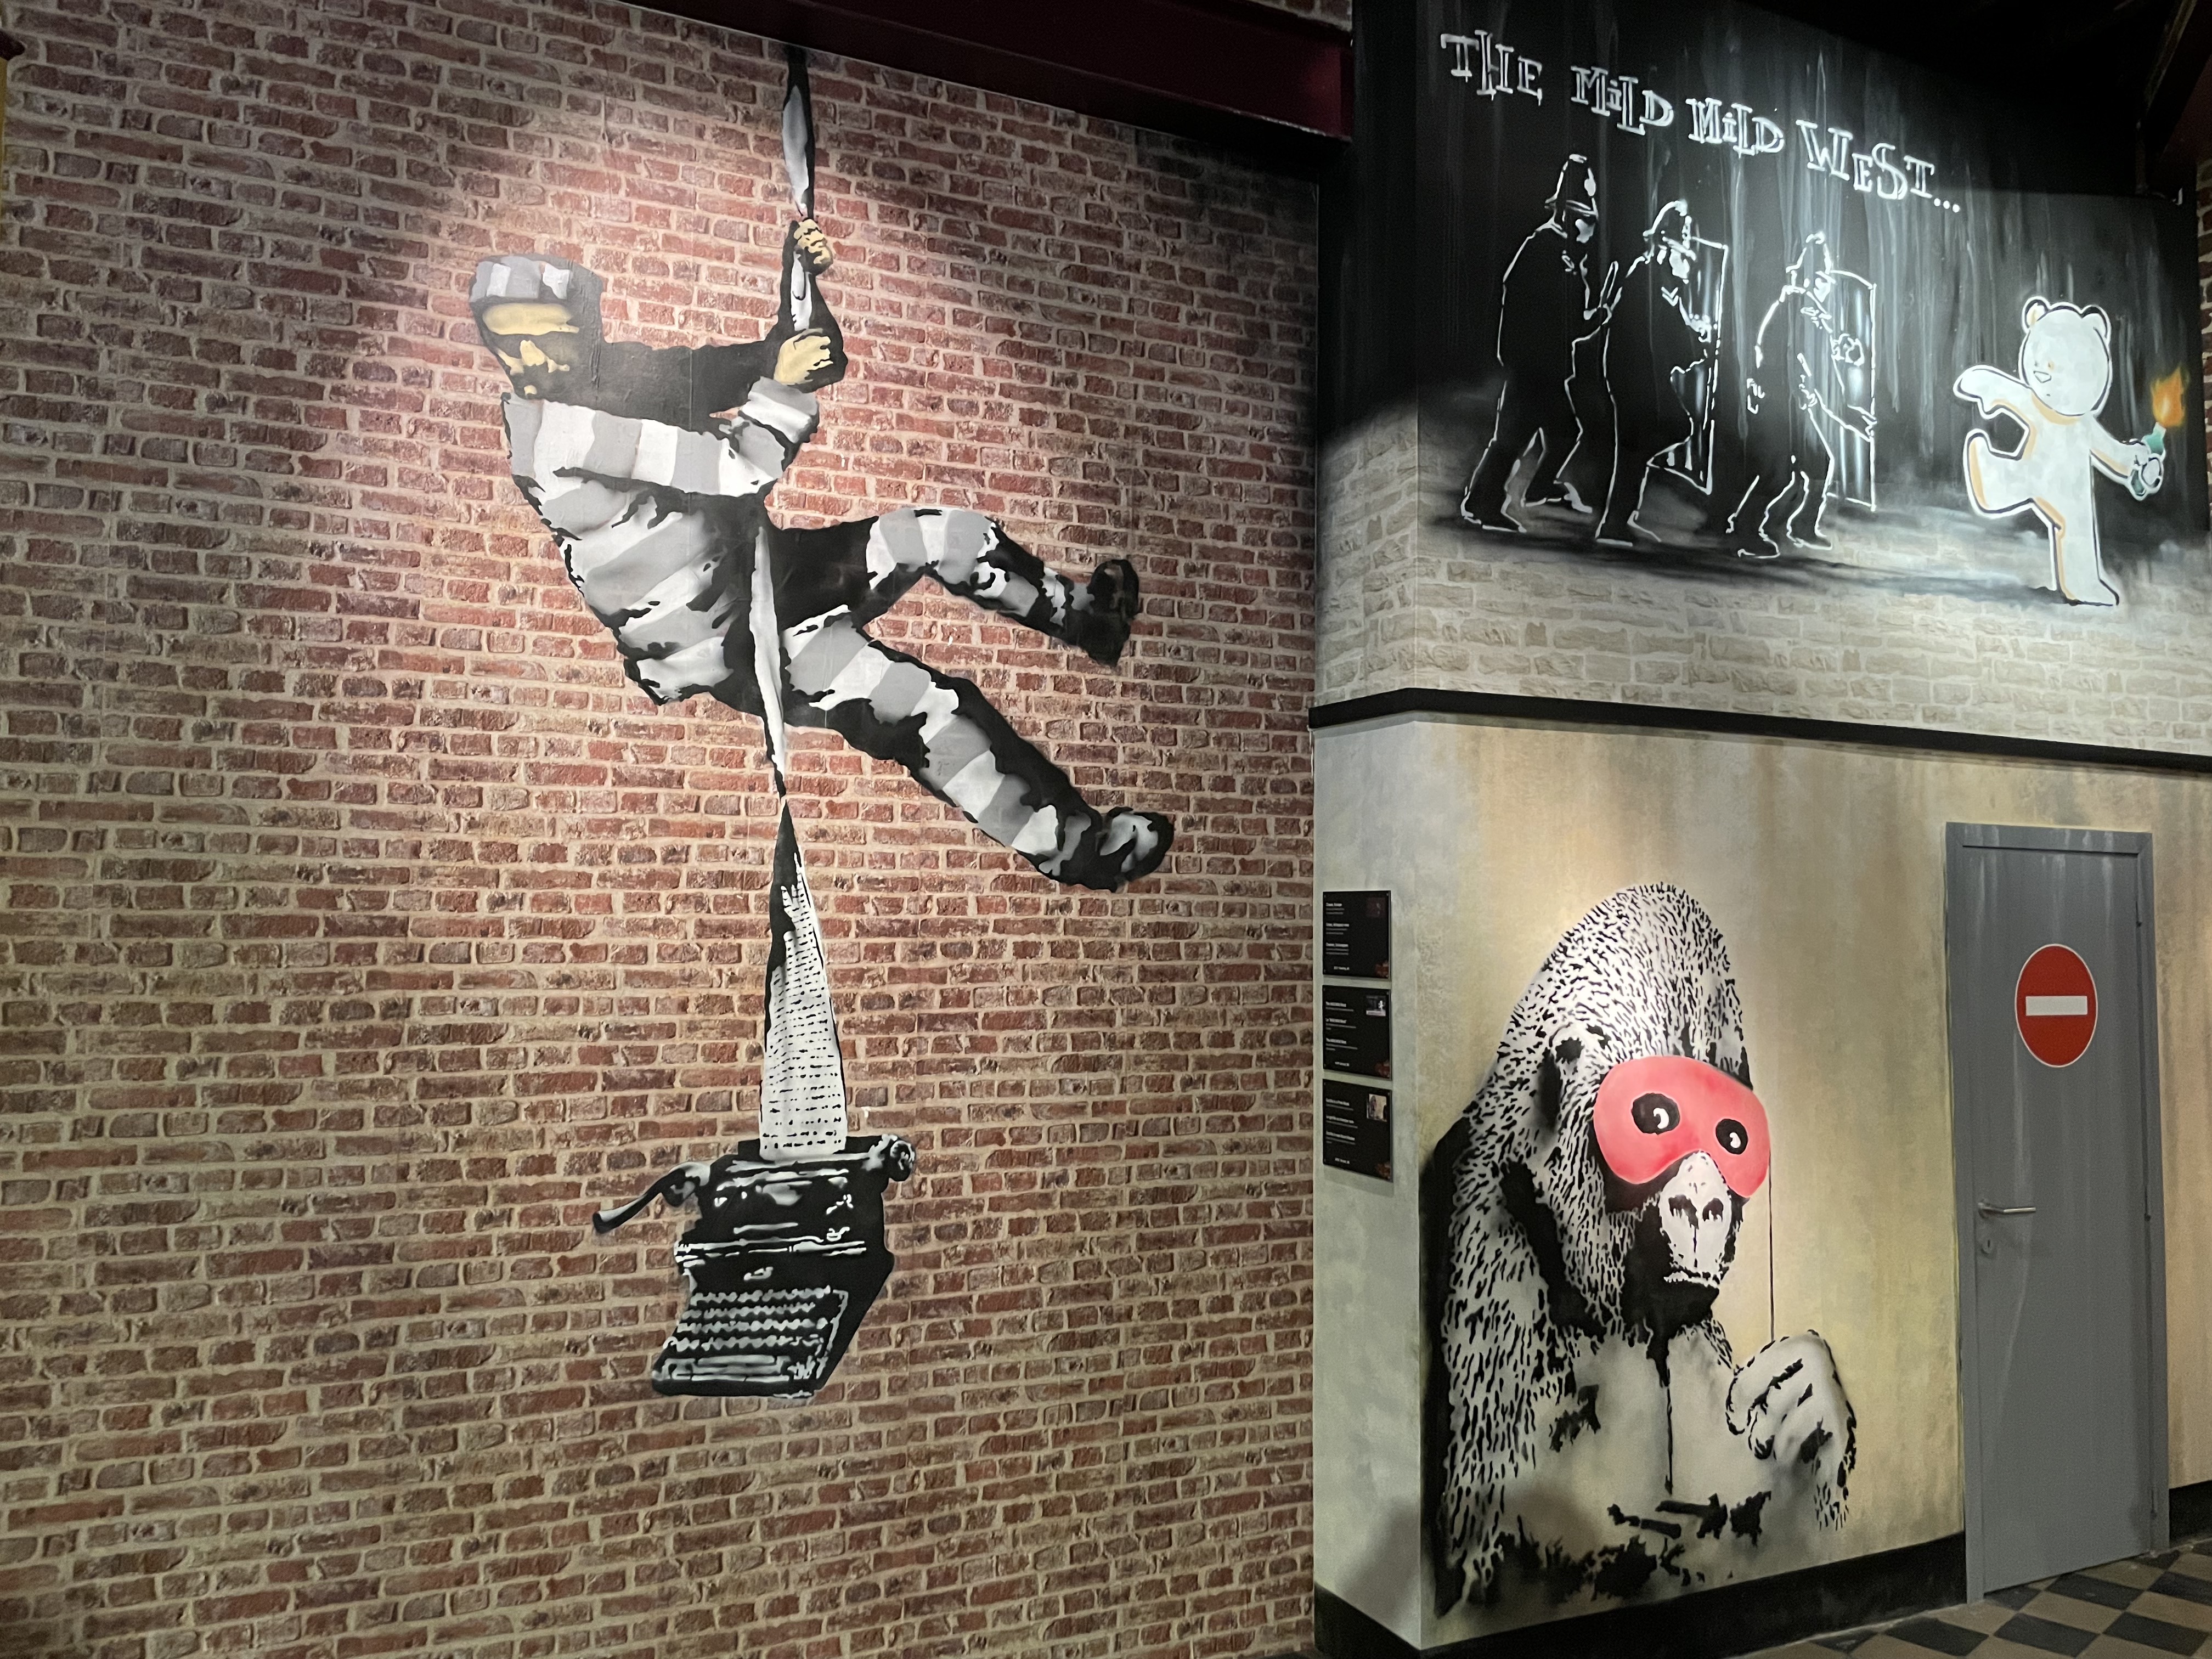 The World of Banksy - Brussels